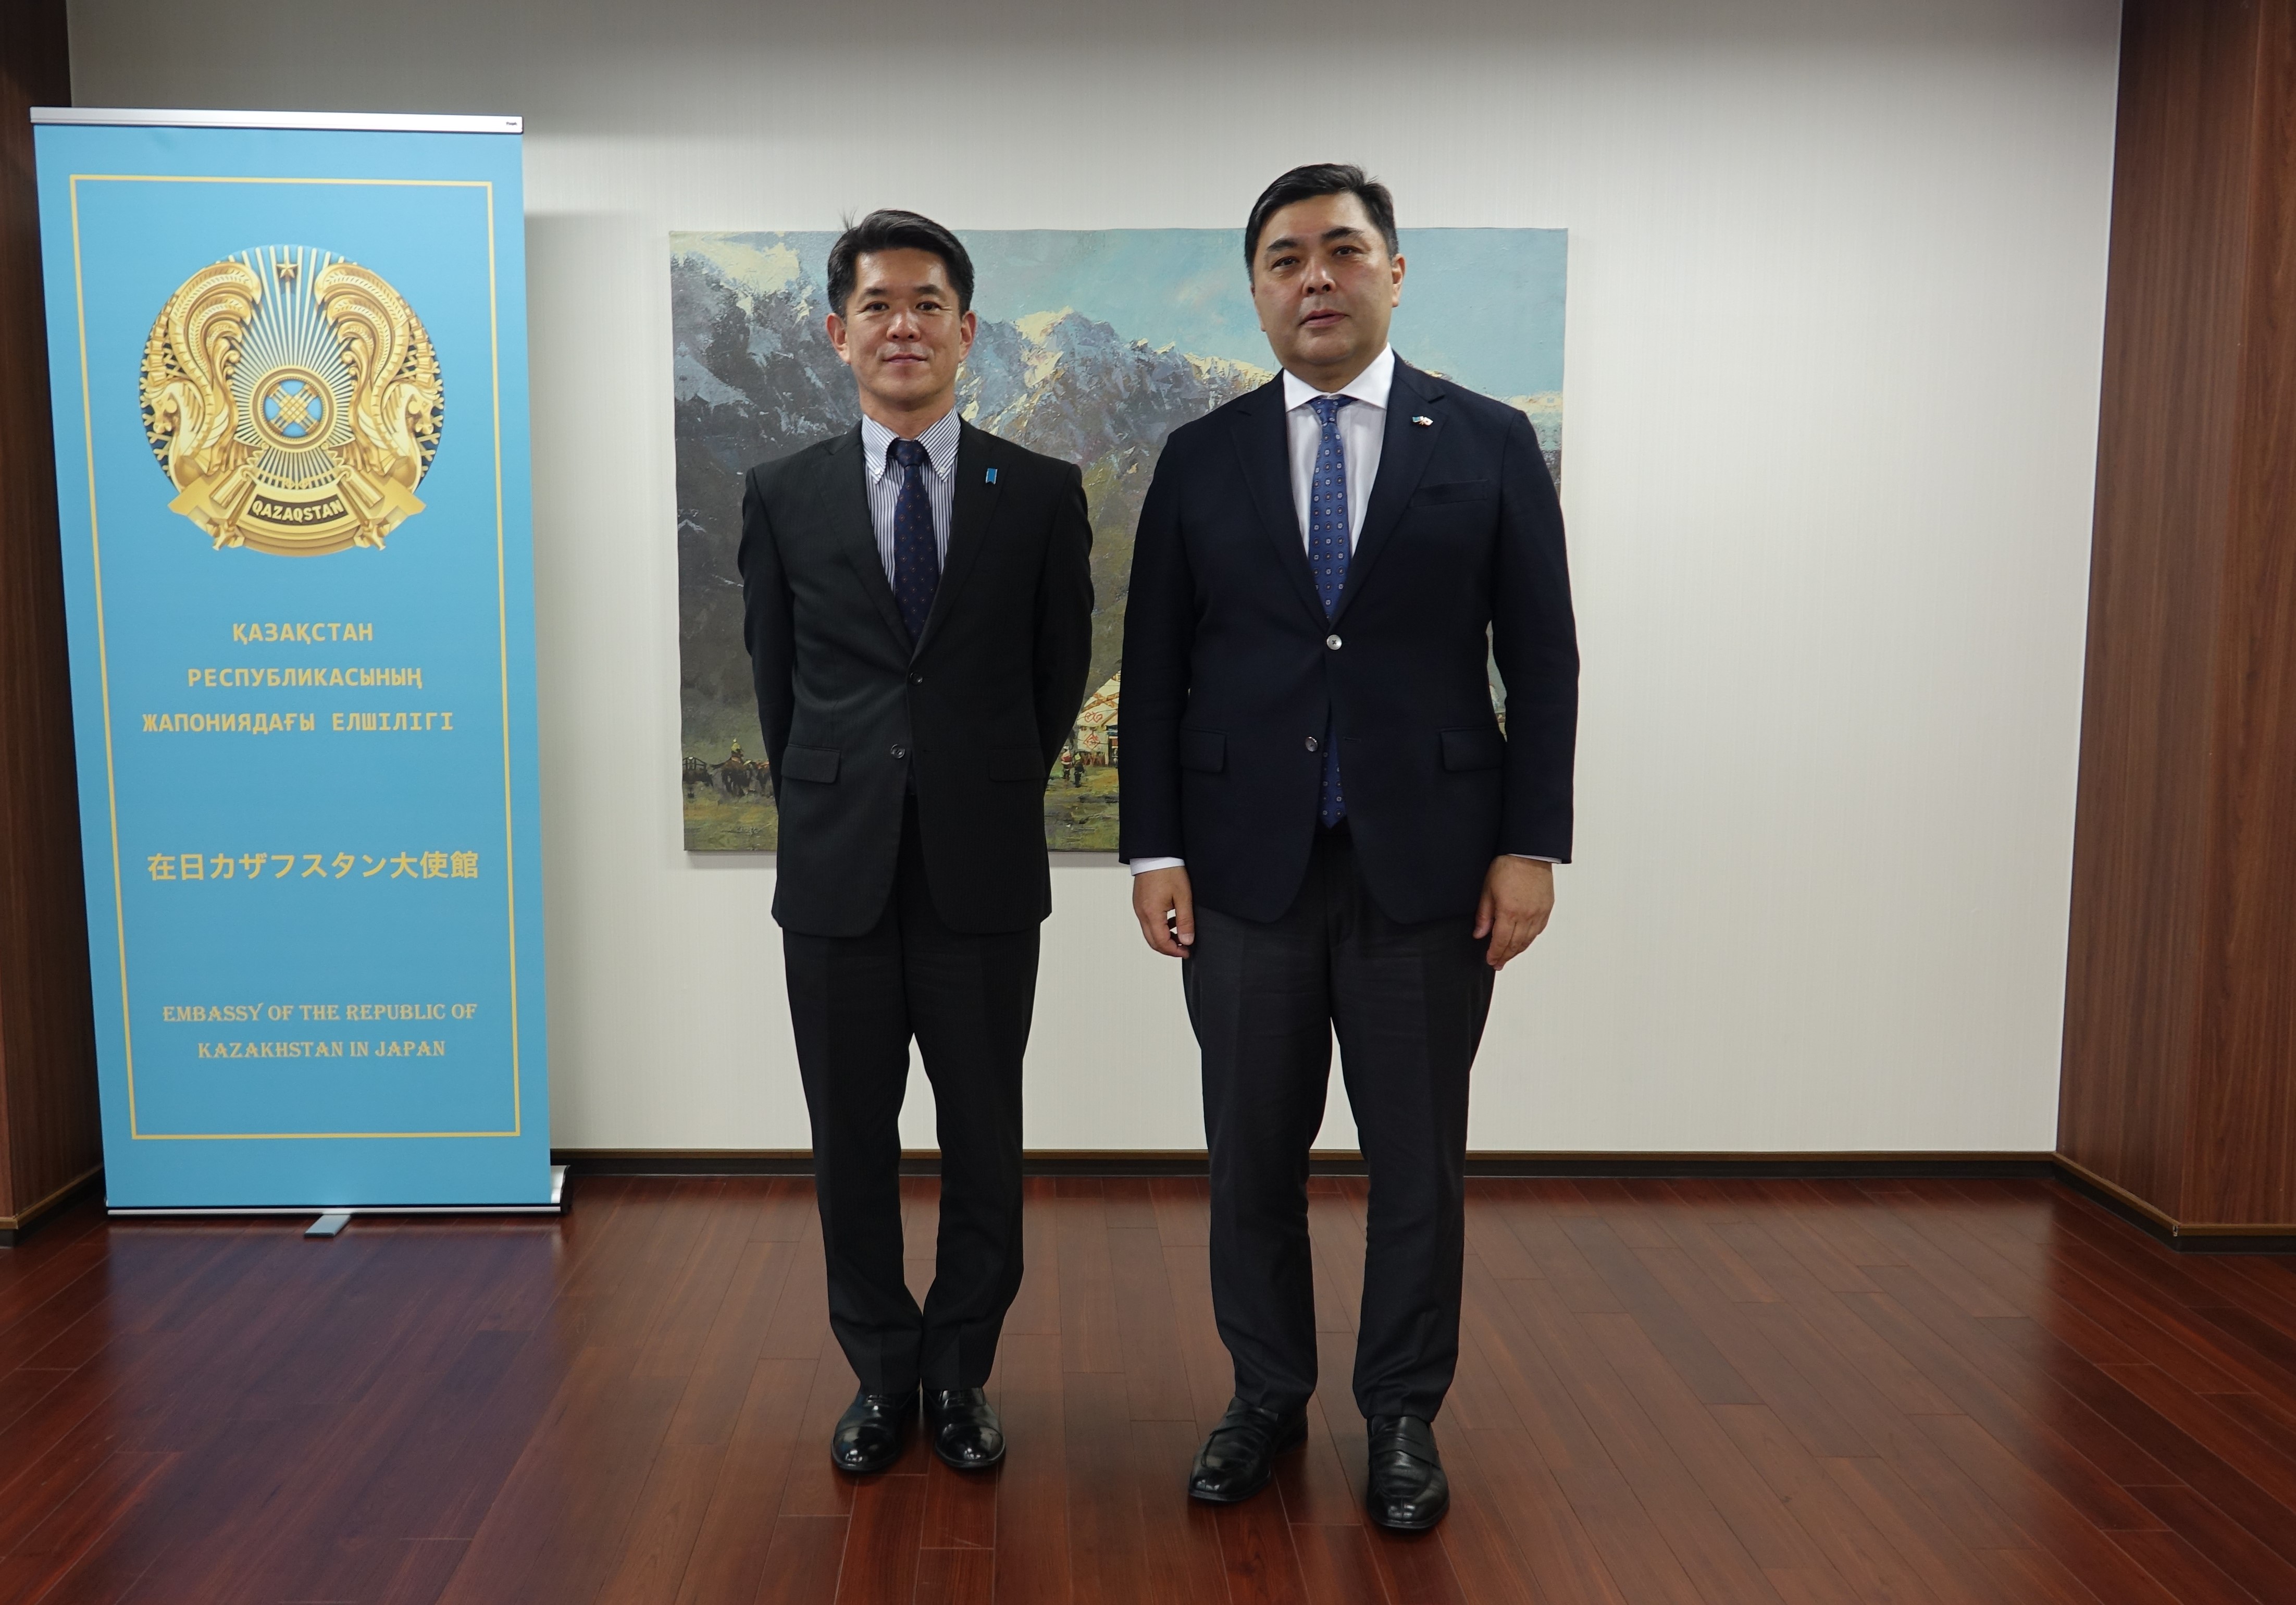 Ambassador Sabr Yessimbekov and Deputy Director-General of the Foreign Policy Bureau of the MOFA of Japan, Ambassador Kazuya Endo discussed strengthening of bilateral cooperation within the international organizations